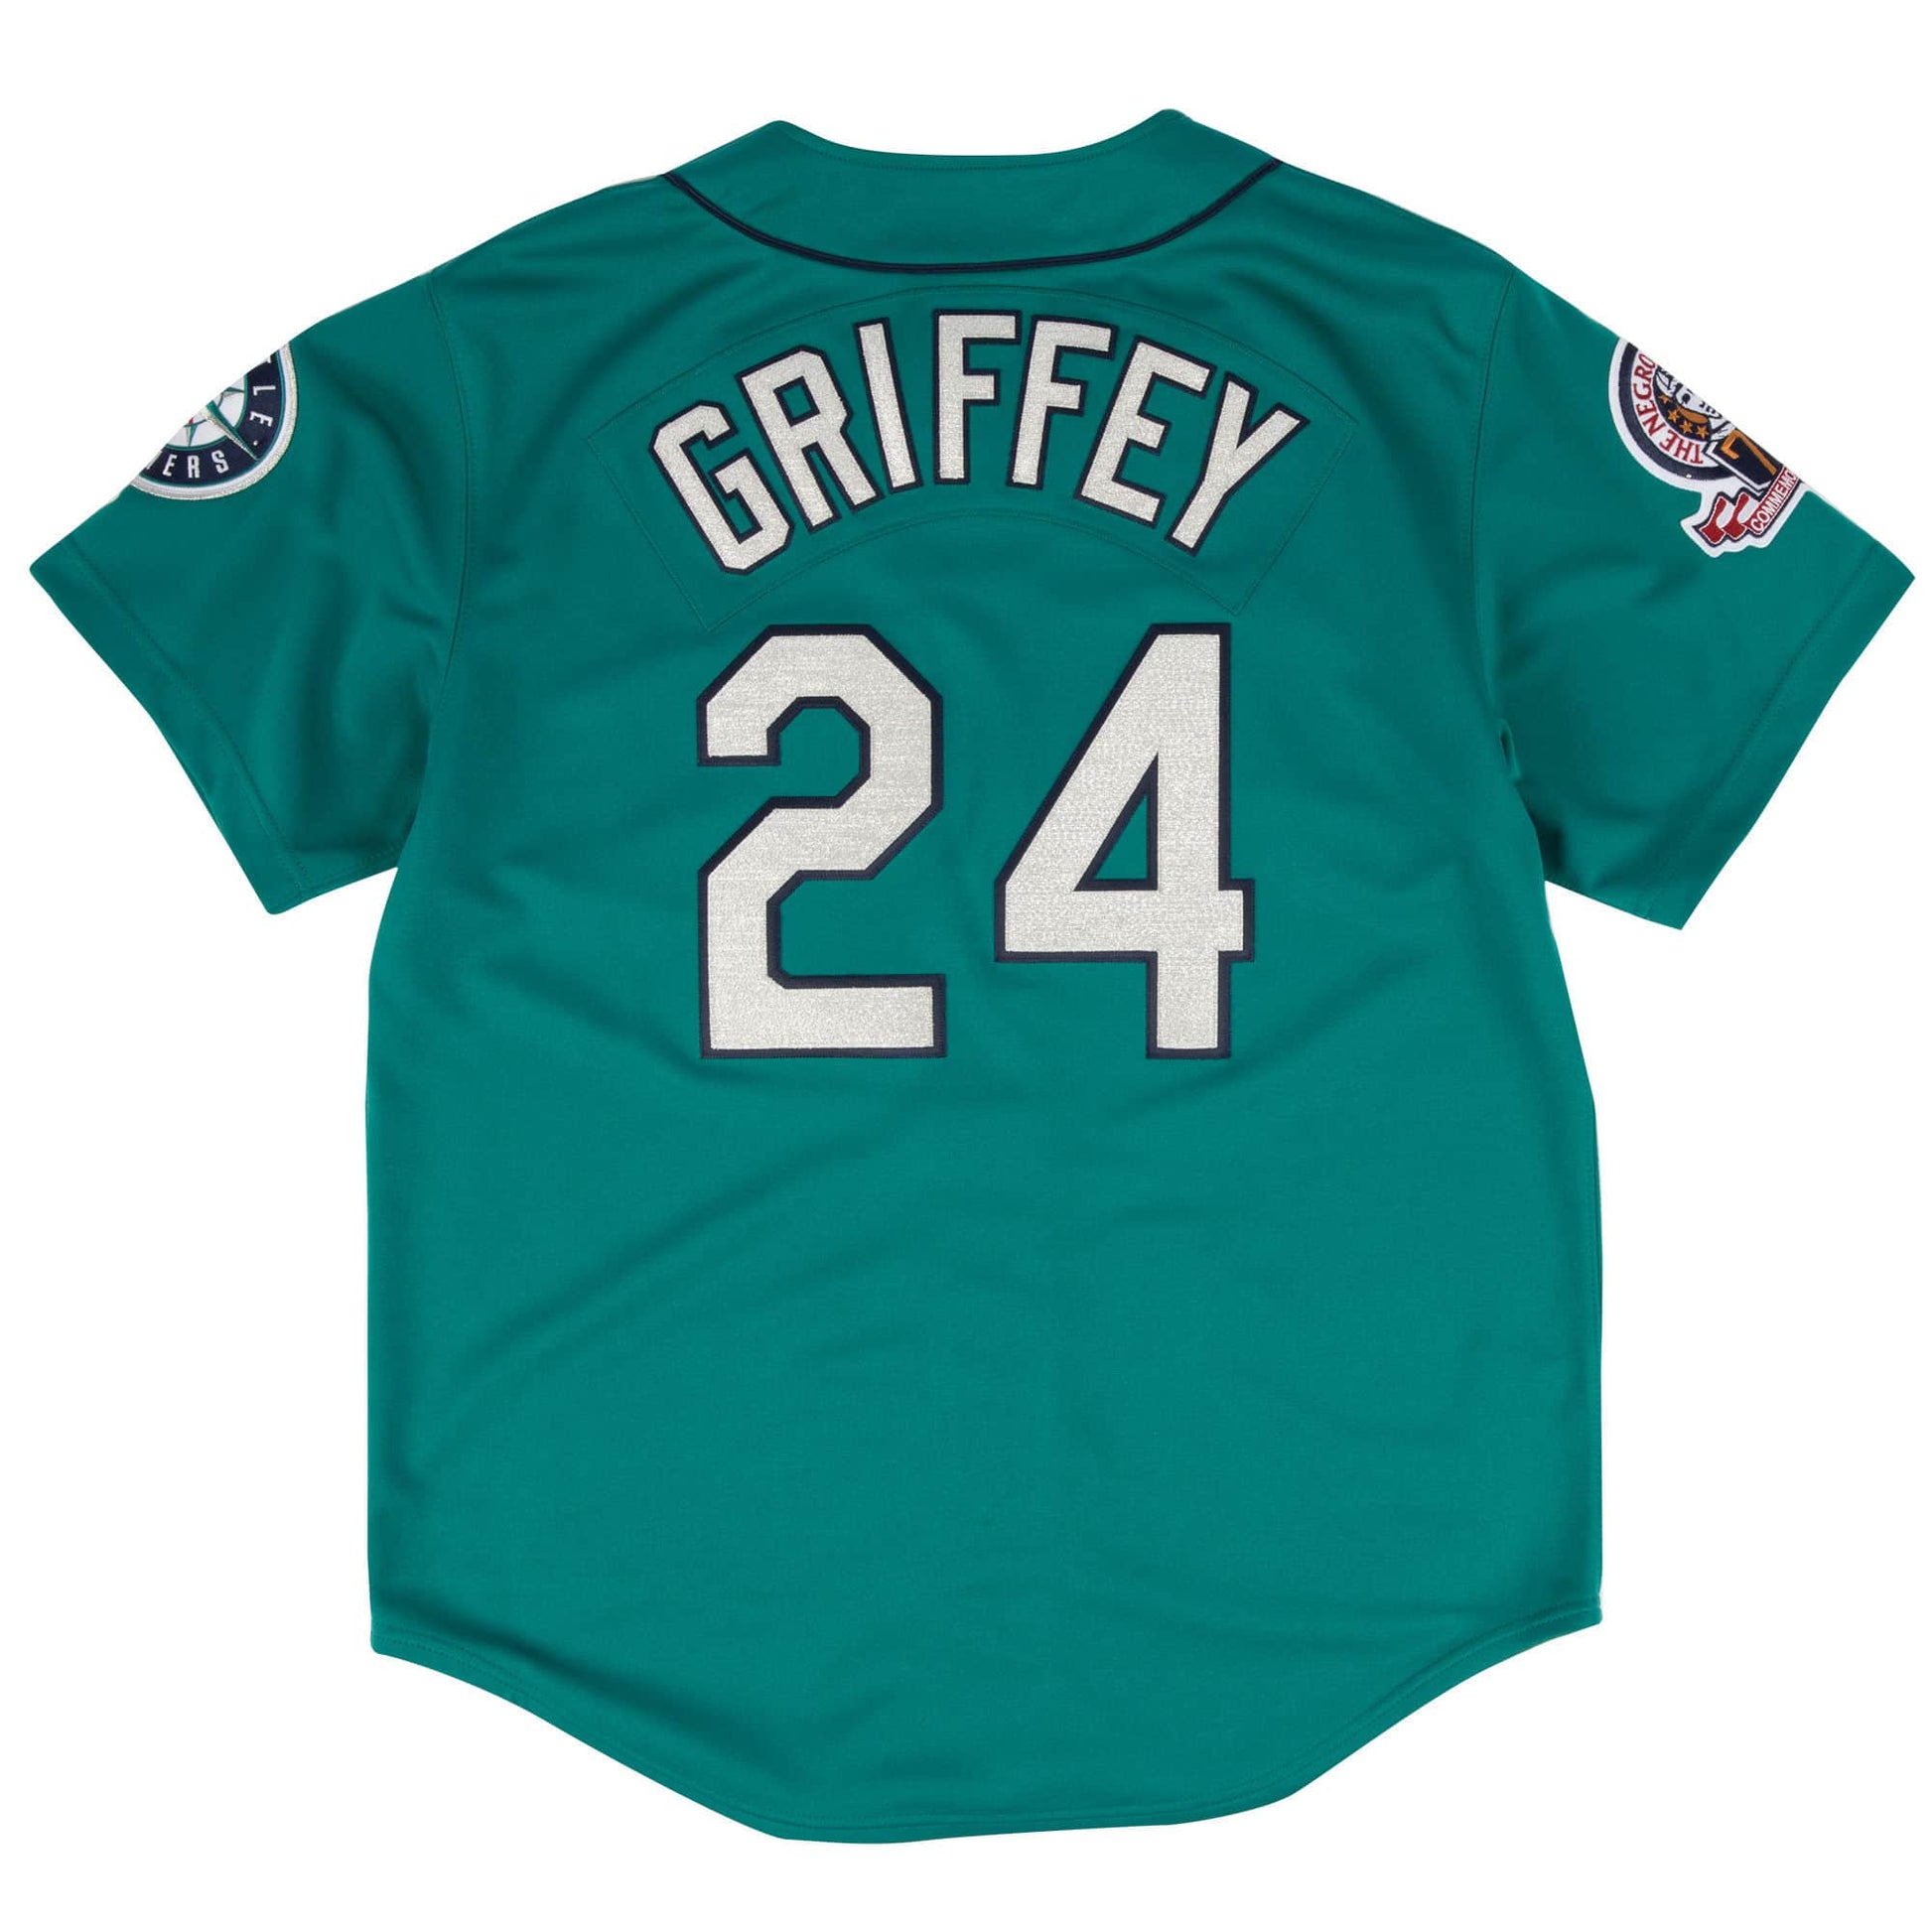 Mariners Griffey 24 Authentic Teal Jersey – Gameday Sports Shop